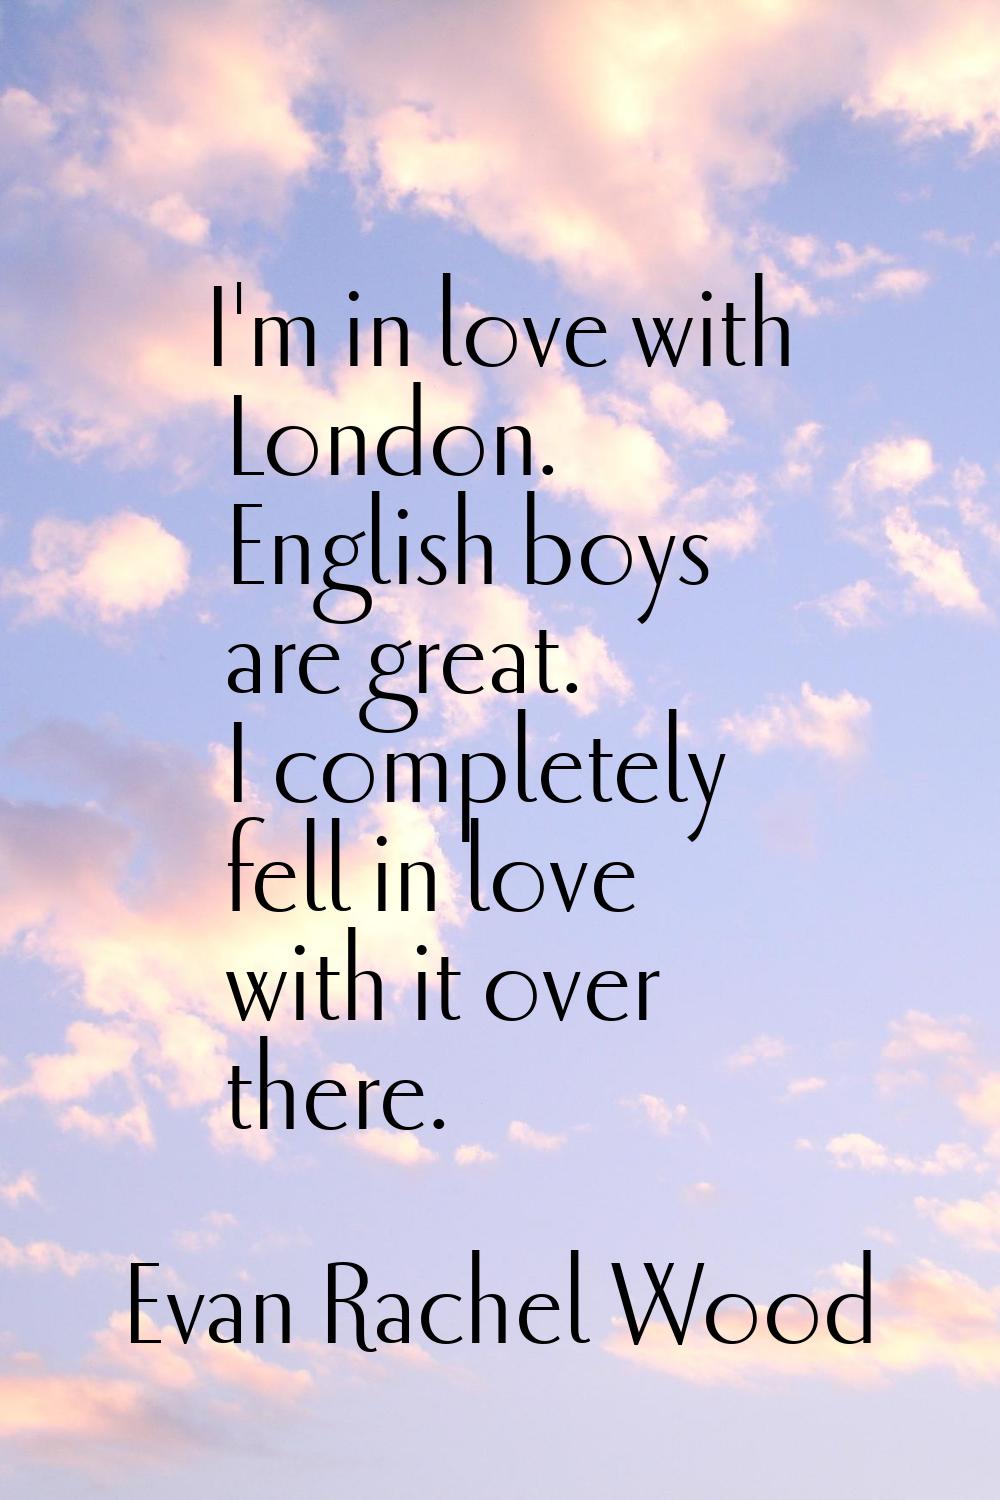 I'm in love with London. English boys are great. I completely fell in love with it over there.